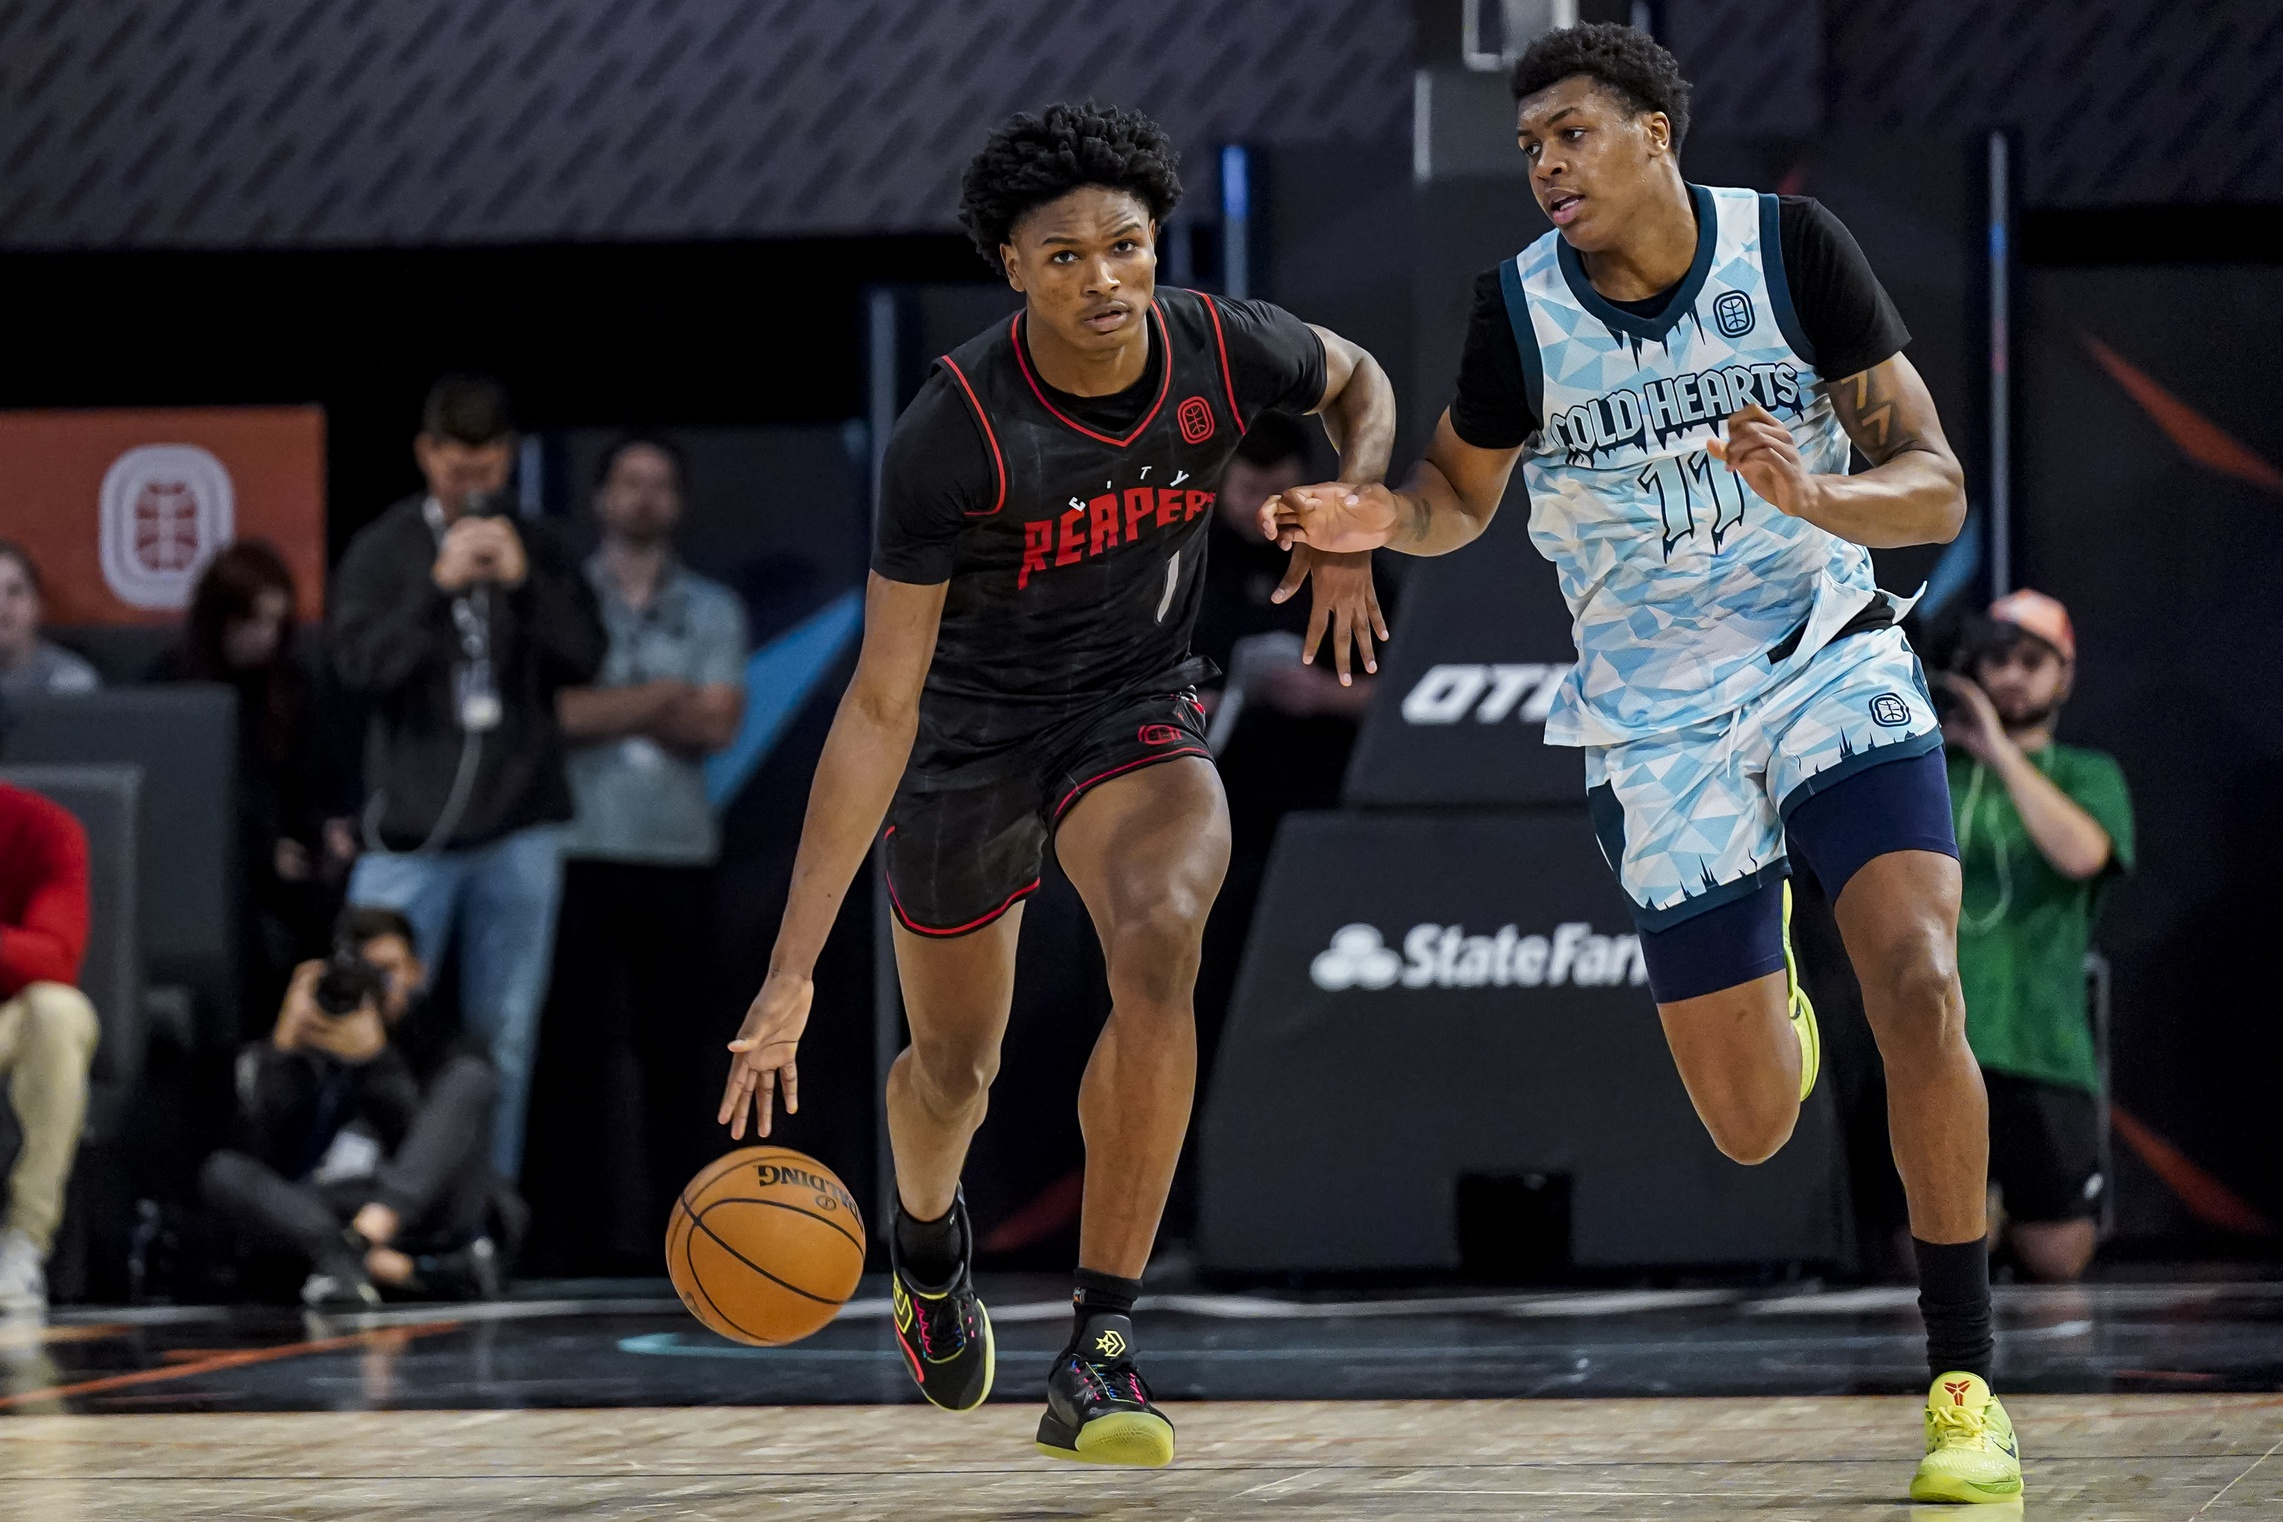 Dec 9, 2022; Atlanta, GA, USA; City Reapers guard Amen Thompson (1) shown during the game against the Cold Hearts at Overtime Elite. Where will he land in this NBA Mock draft? Mandatory Credit: Dale Zanine-USA TODAY Sports